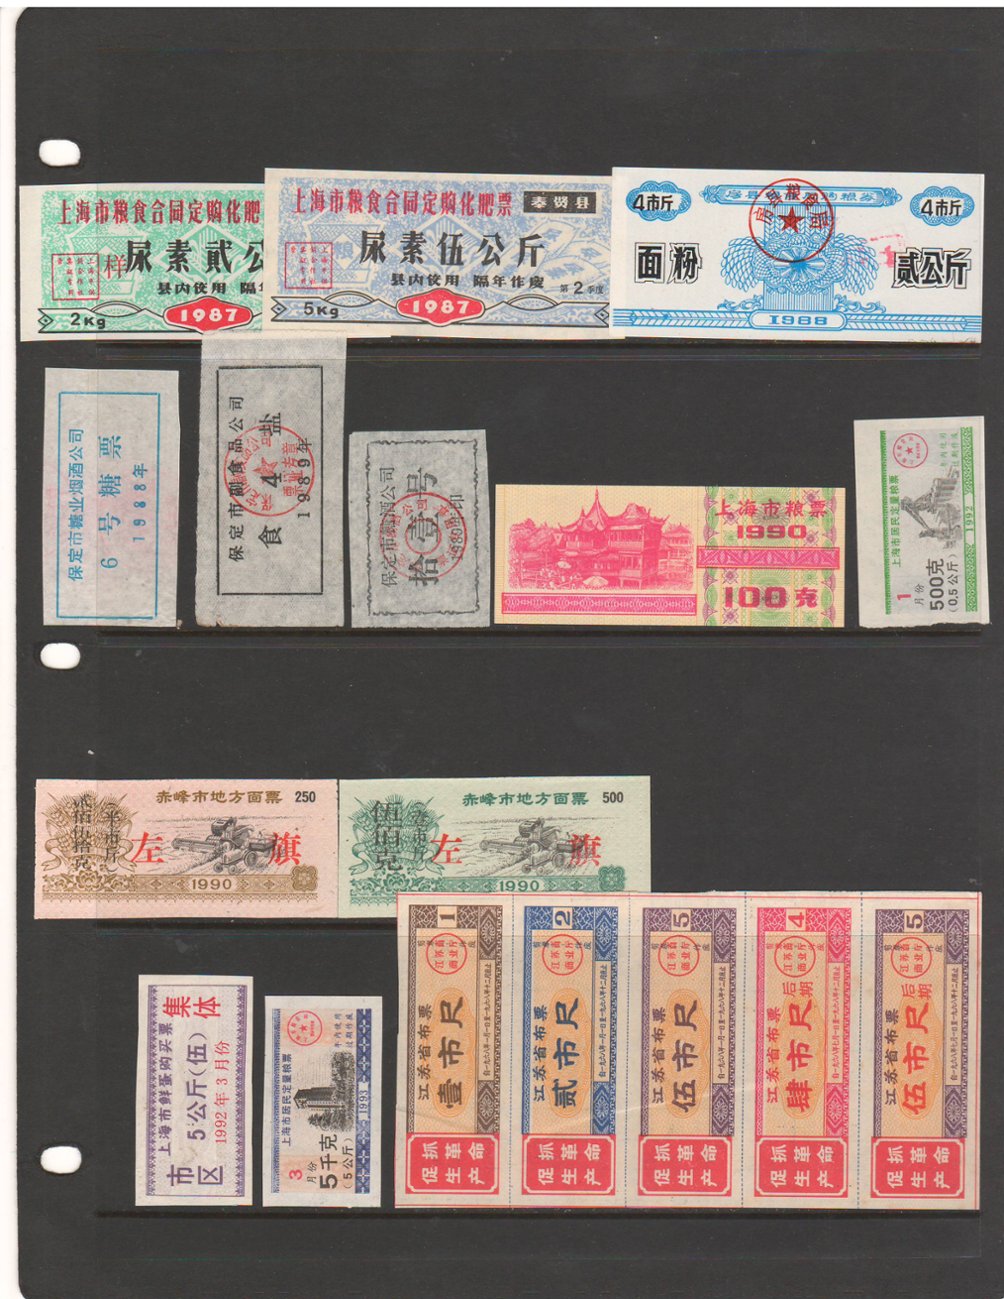 Ration Coupons - 62 different from 1962-1993 (3 images)